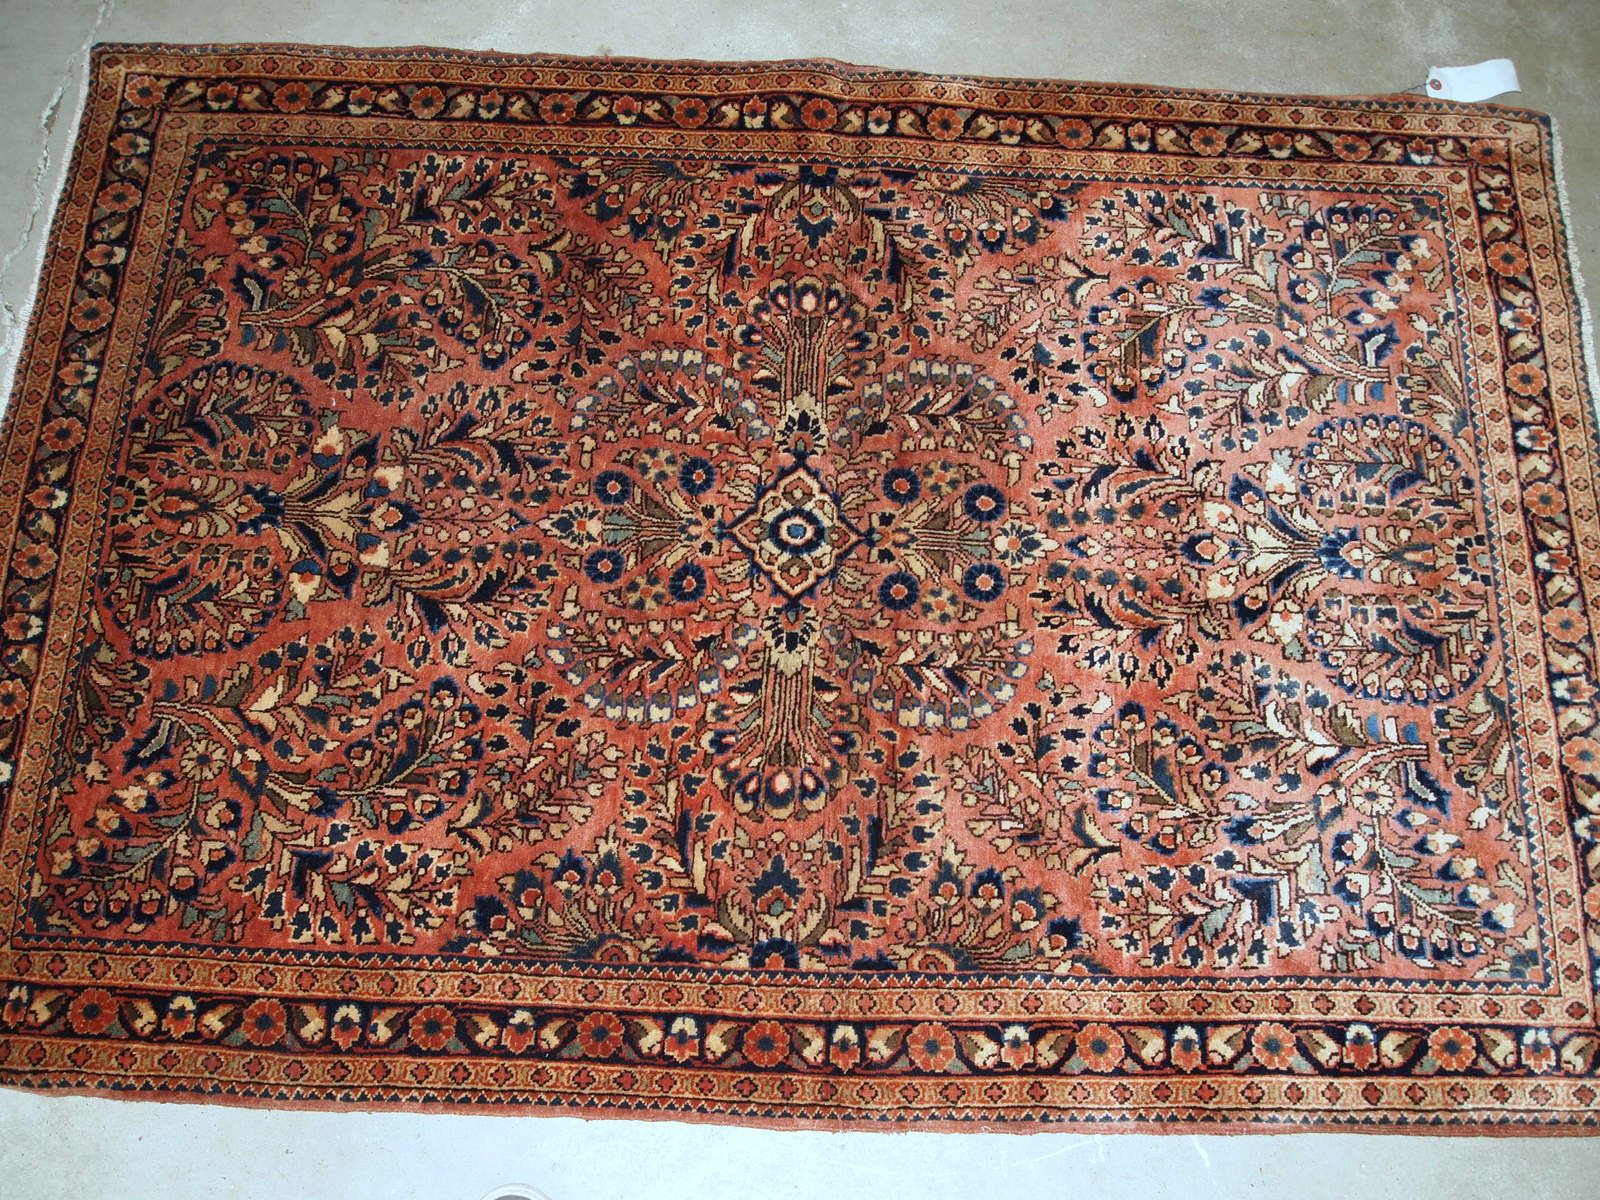 Handmade antique Persian Sarouk rug in original good condition. The rug is from the beginning of 20th century made in traditional design.